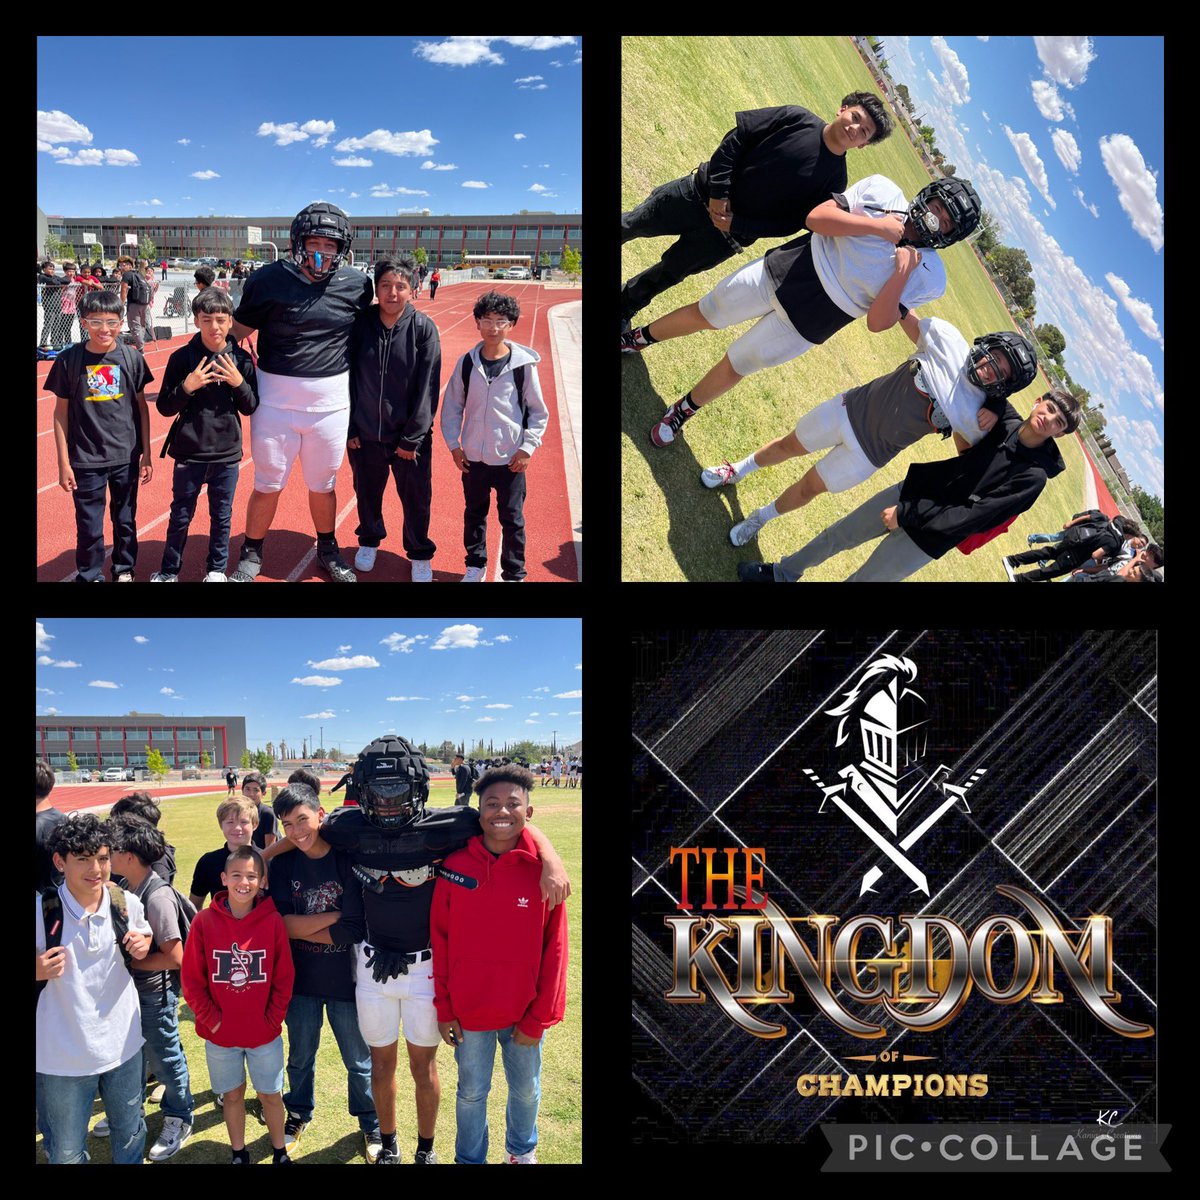 Our first ever Satellite Practice @HANKSMSYISD went great today. It was awesome having our 7th & 8th grade Cavaliers on the sidelines with us. The future at #TheKingdom is very bright! Thank you for your help & cooperation @JLucero_HMS & @MrARendon.